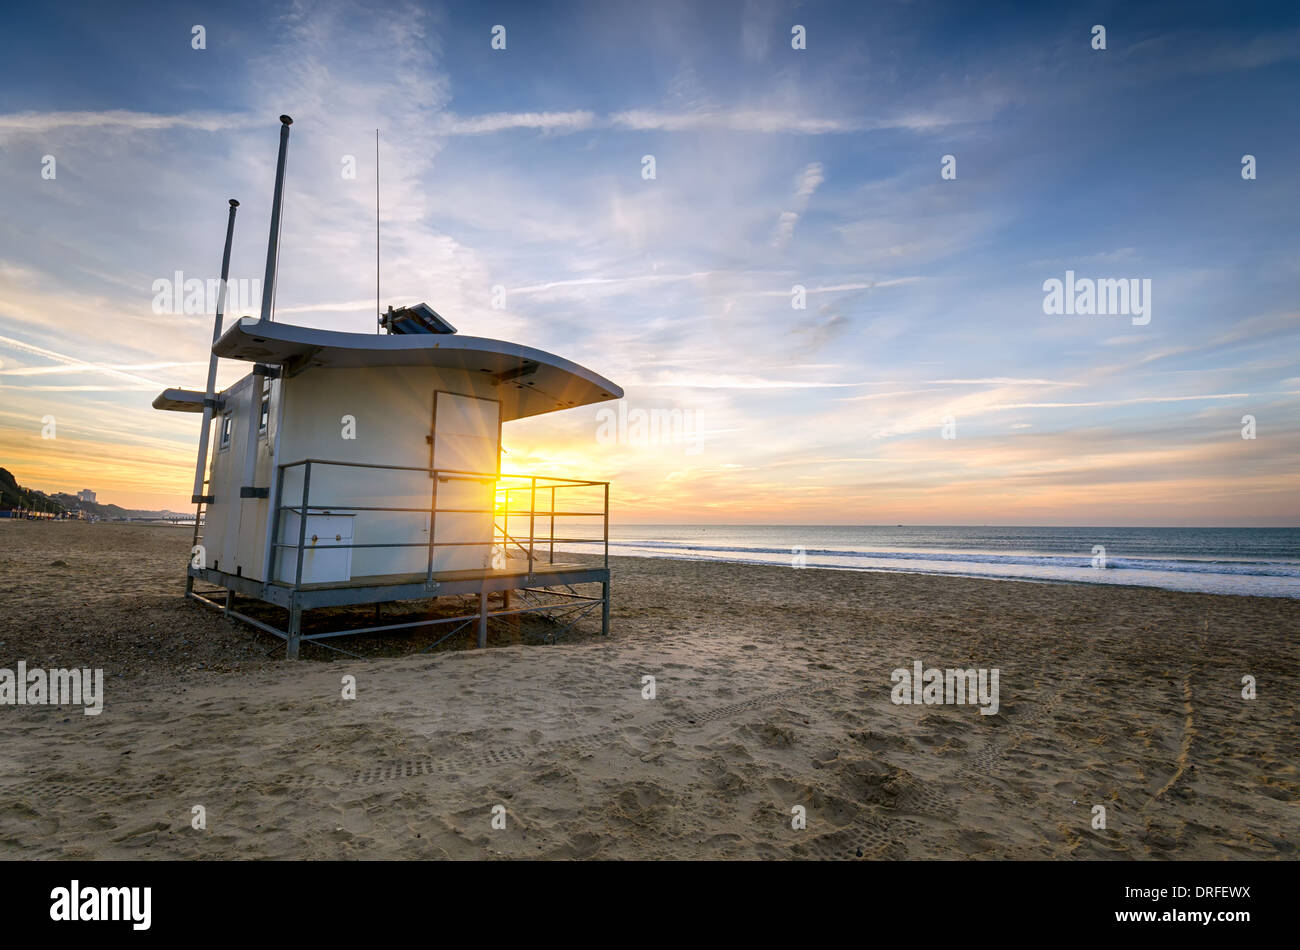 A Lifeguard hut on at sunrise at Durley chine on Bournemouth beach in Dorset Stock Photo